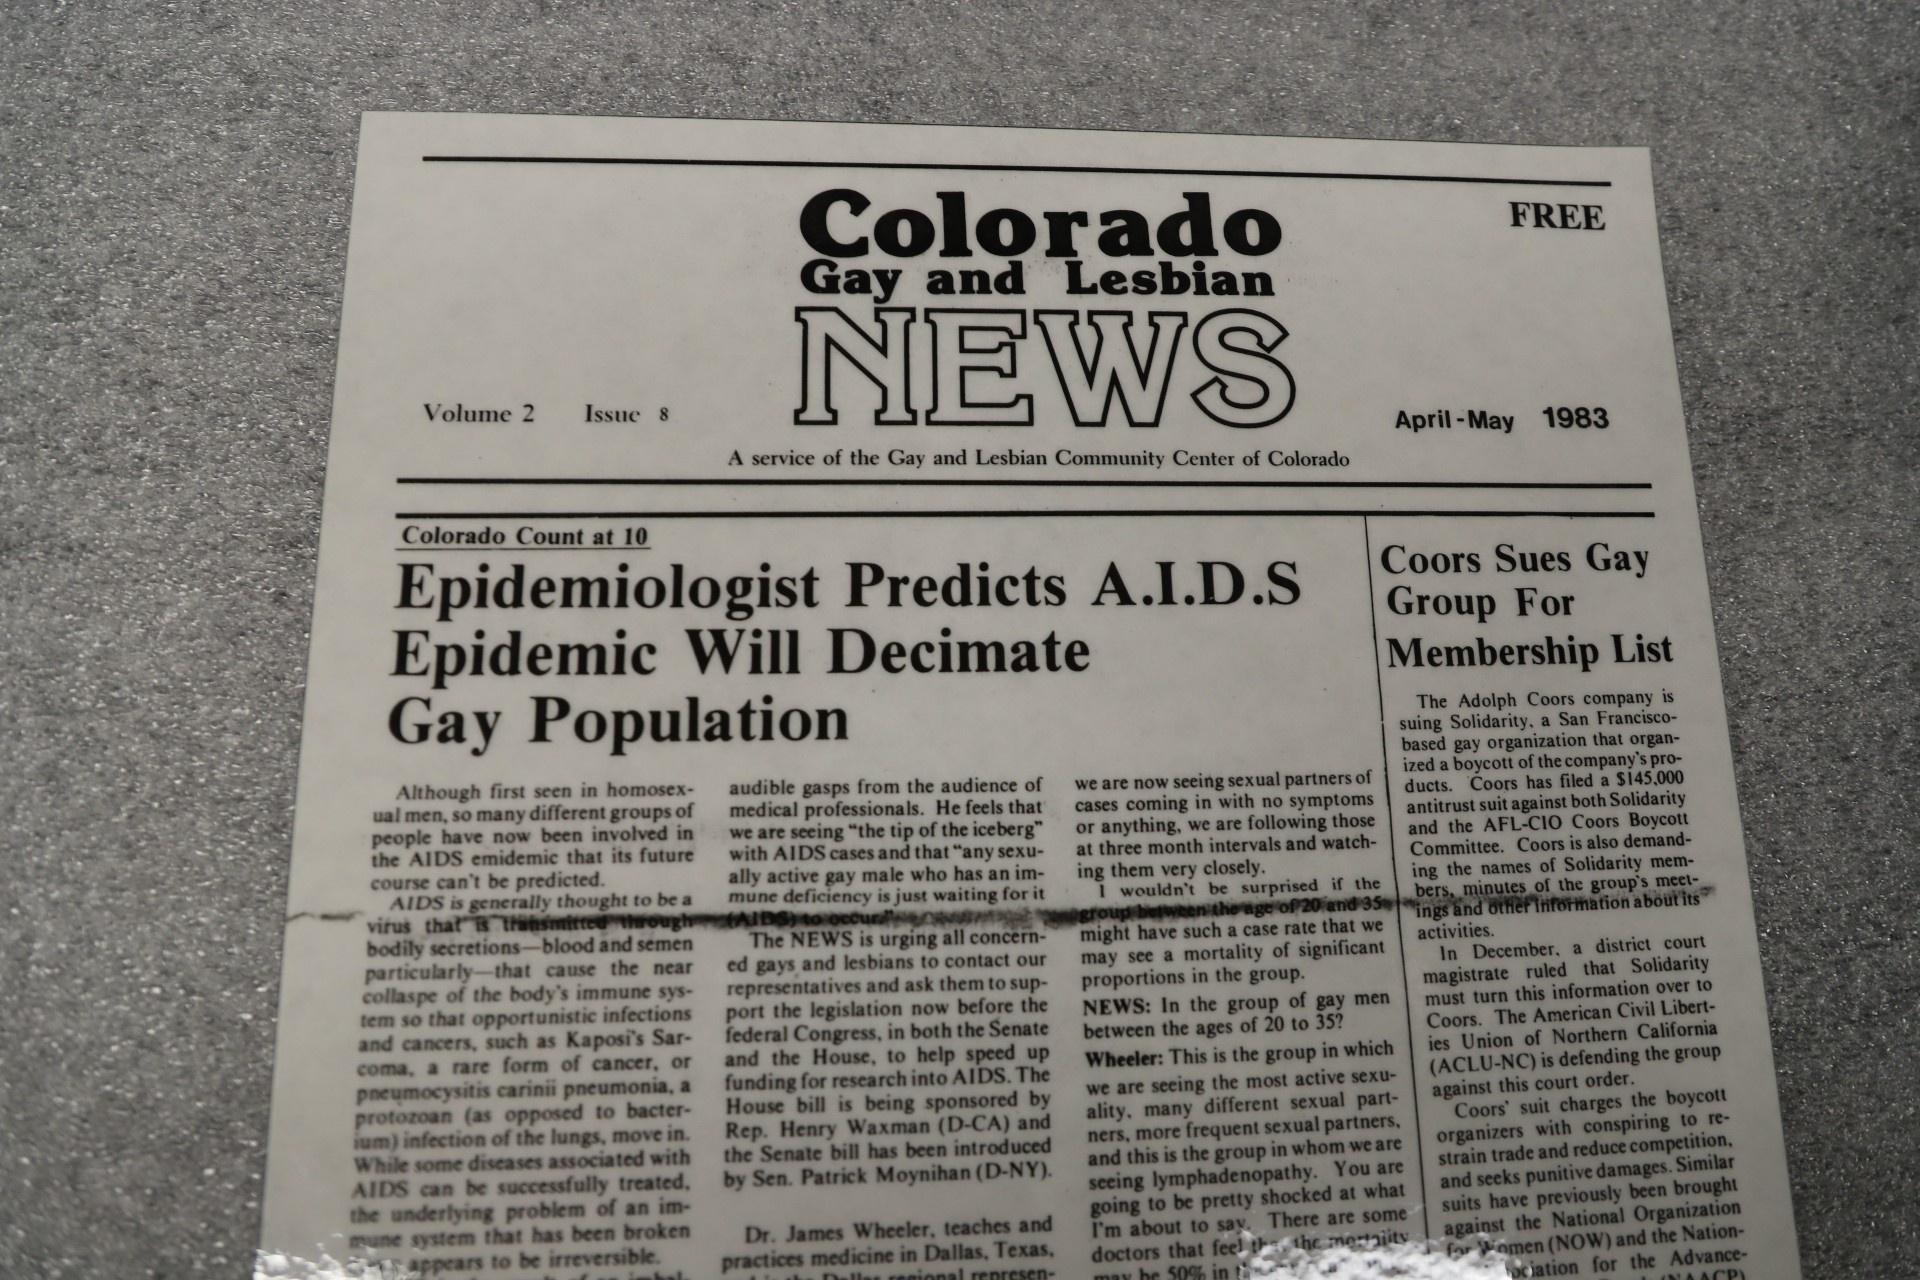 A 1983 issue of the Colorado Gay and Lesbian News with the main headline "Epidemiologist Predicts AIDS epidemic will decimate gay population"